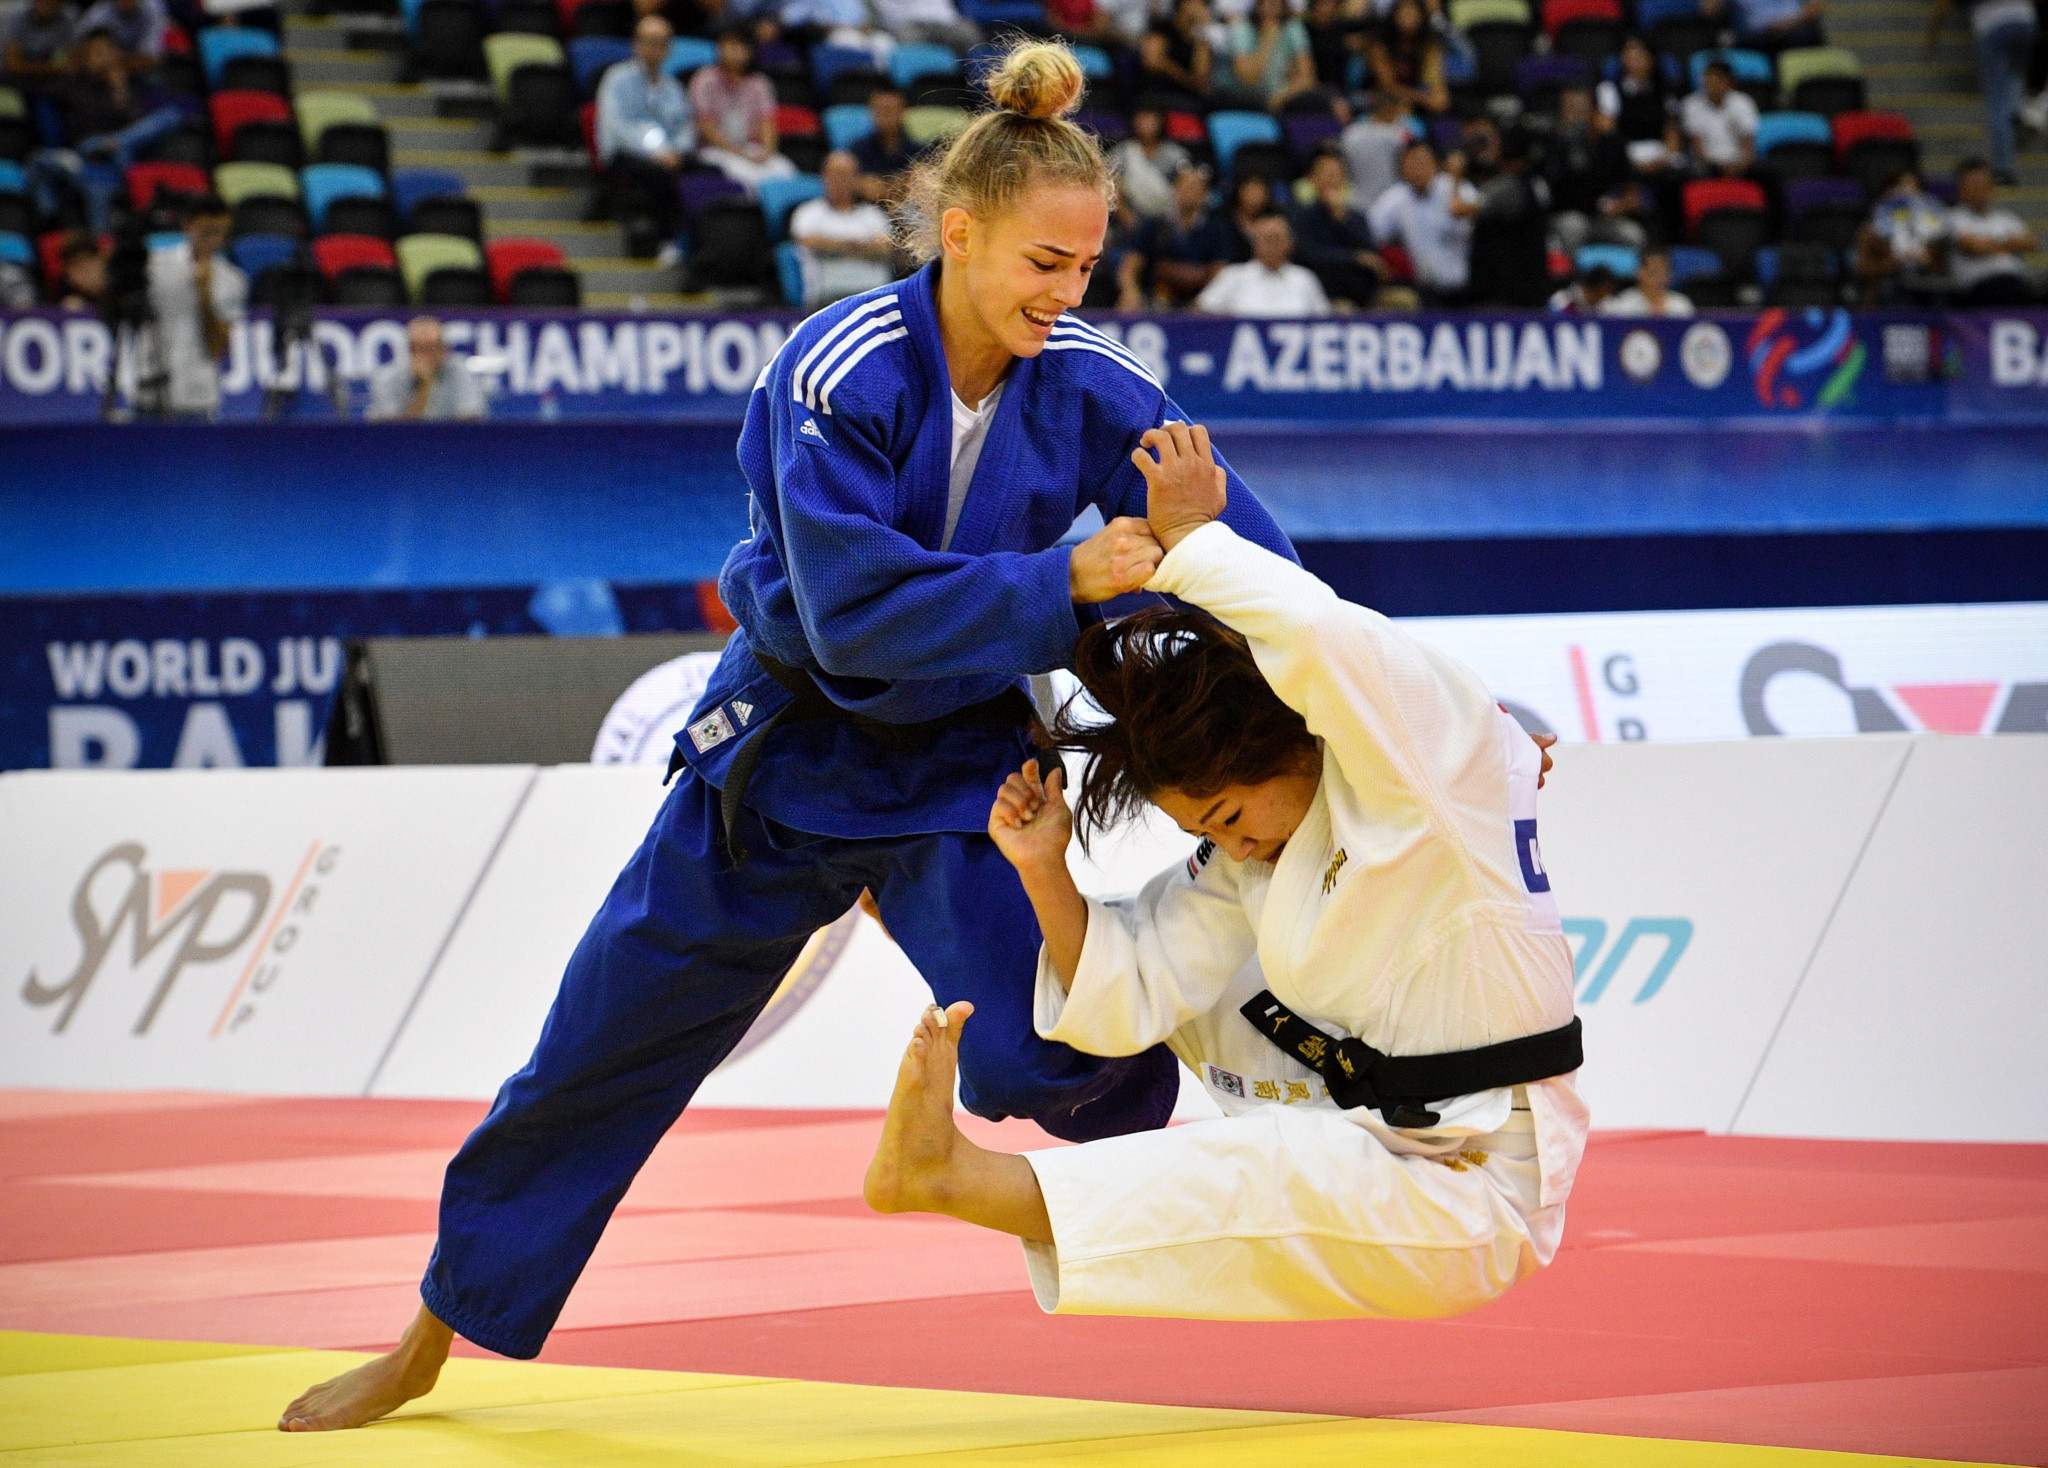 Ukrainian whizz-kid Bilodid set to return to competition at IJF Grand Prix in Tbilisi